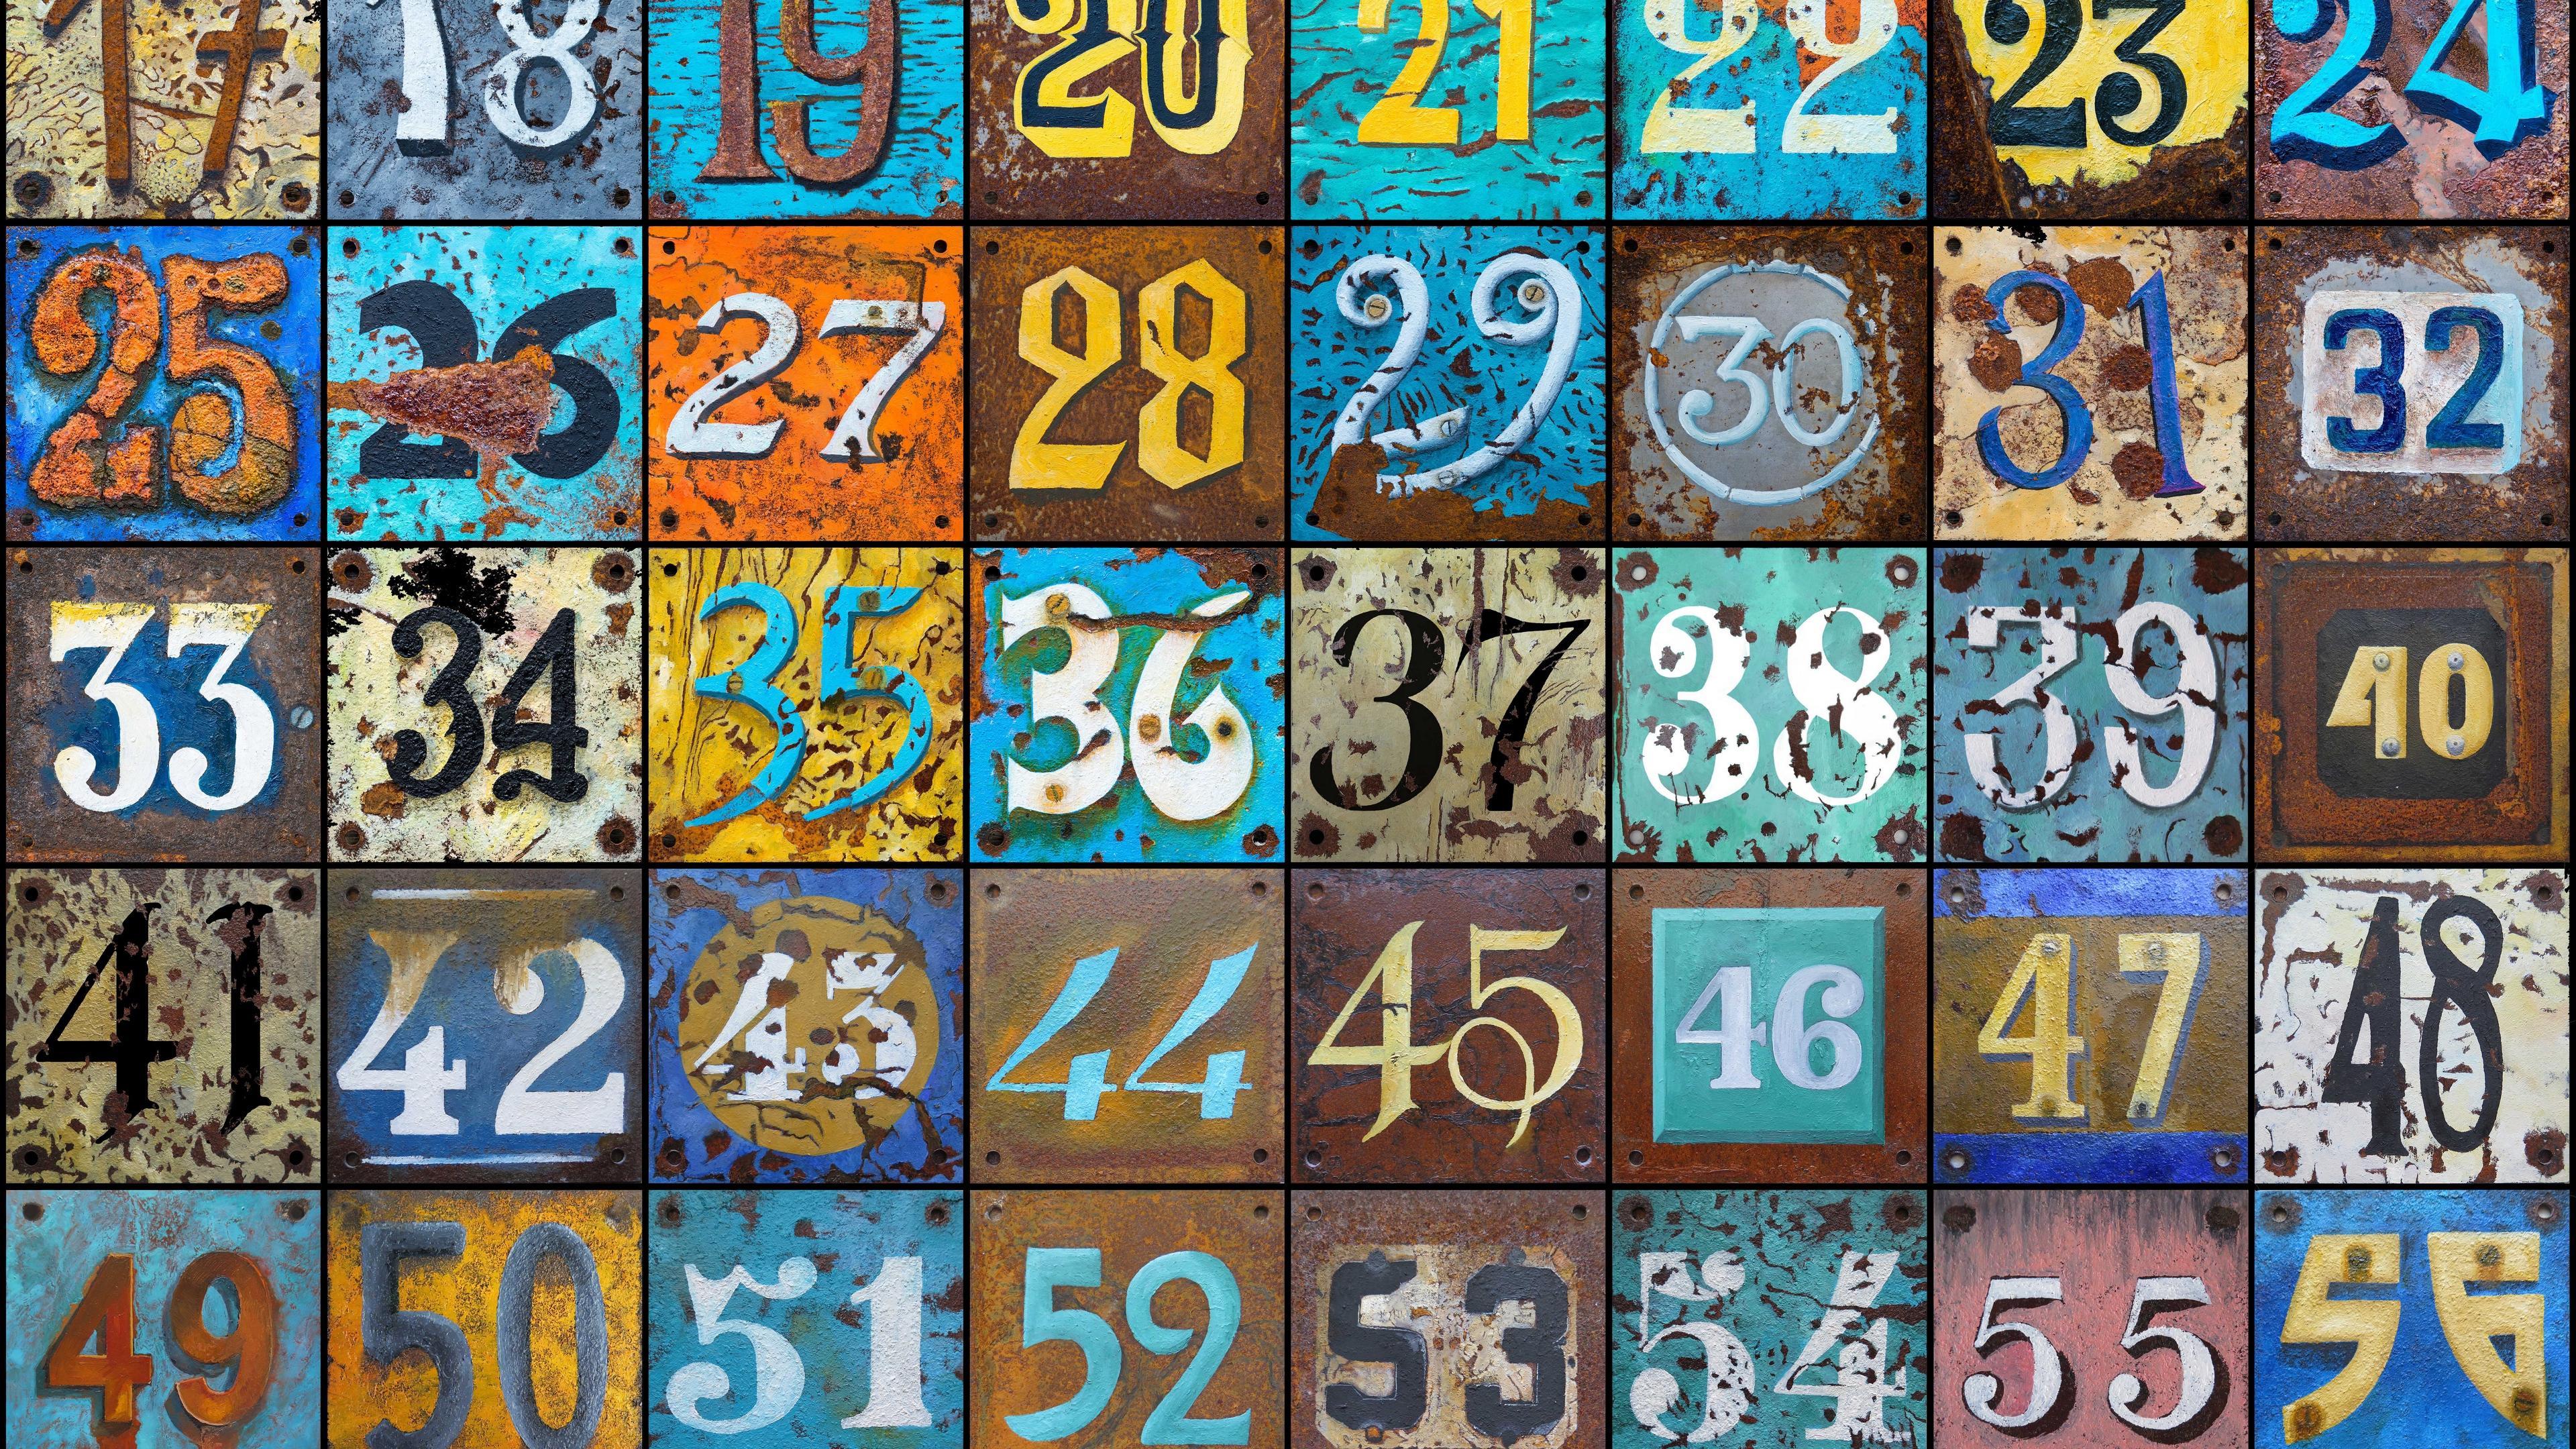 Download wallpaper 3840x2160 numbers, texture, rust, colorful 4k uhd